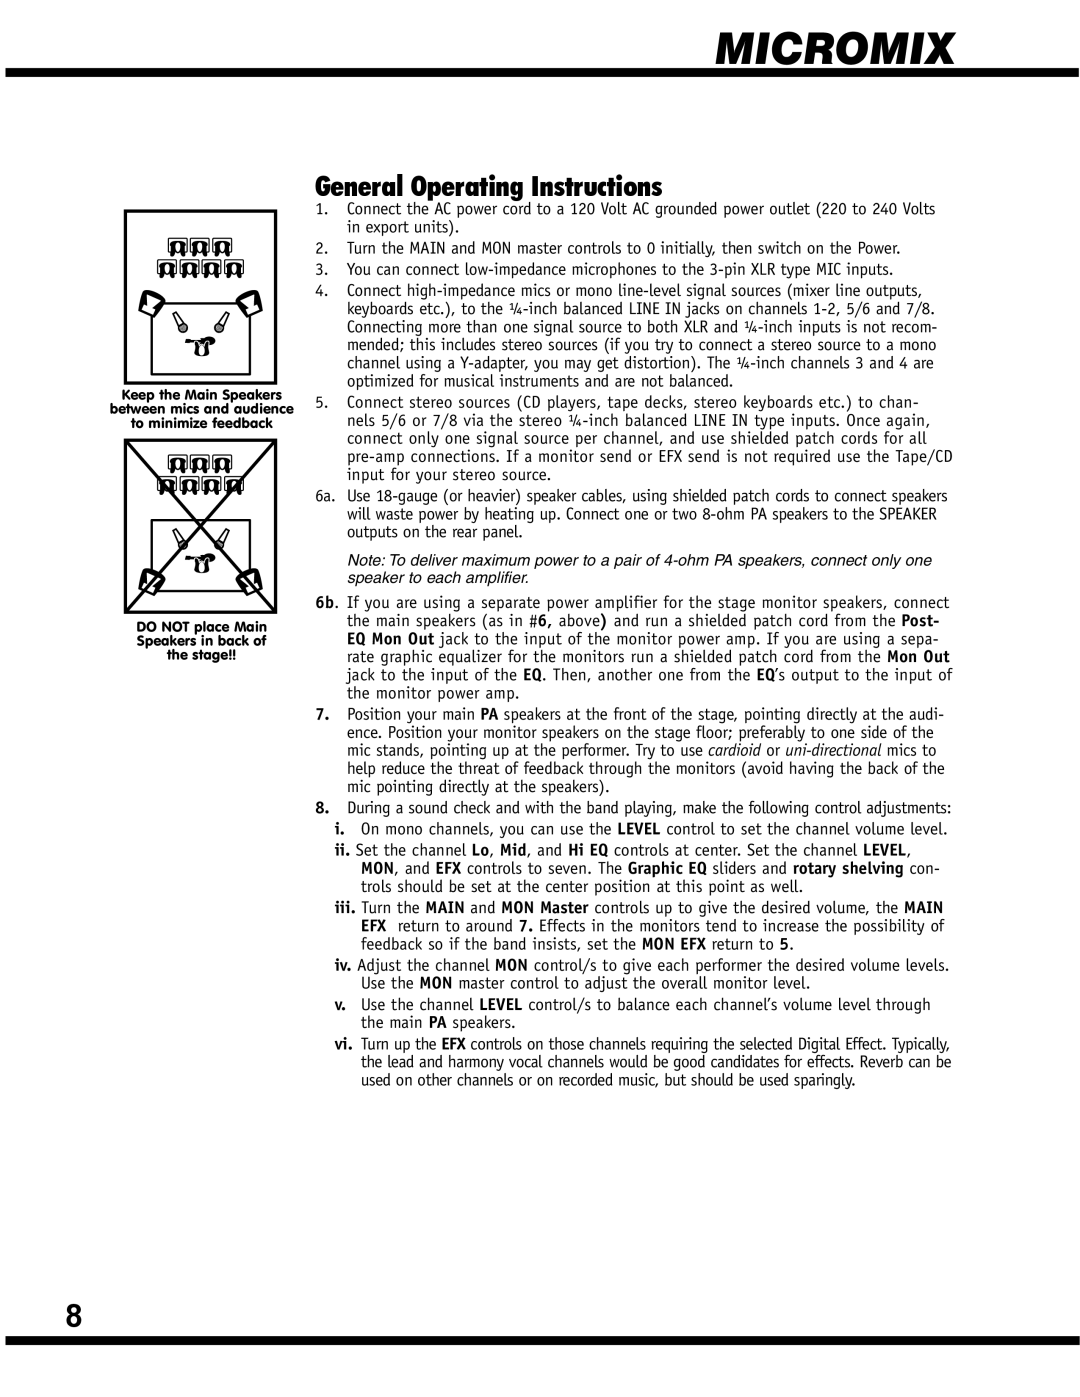 Yorkville Sound YS 1088 manual General Operating Instructions, Micromix, DO NOT place Main Speakers in back of the stage 